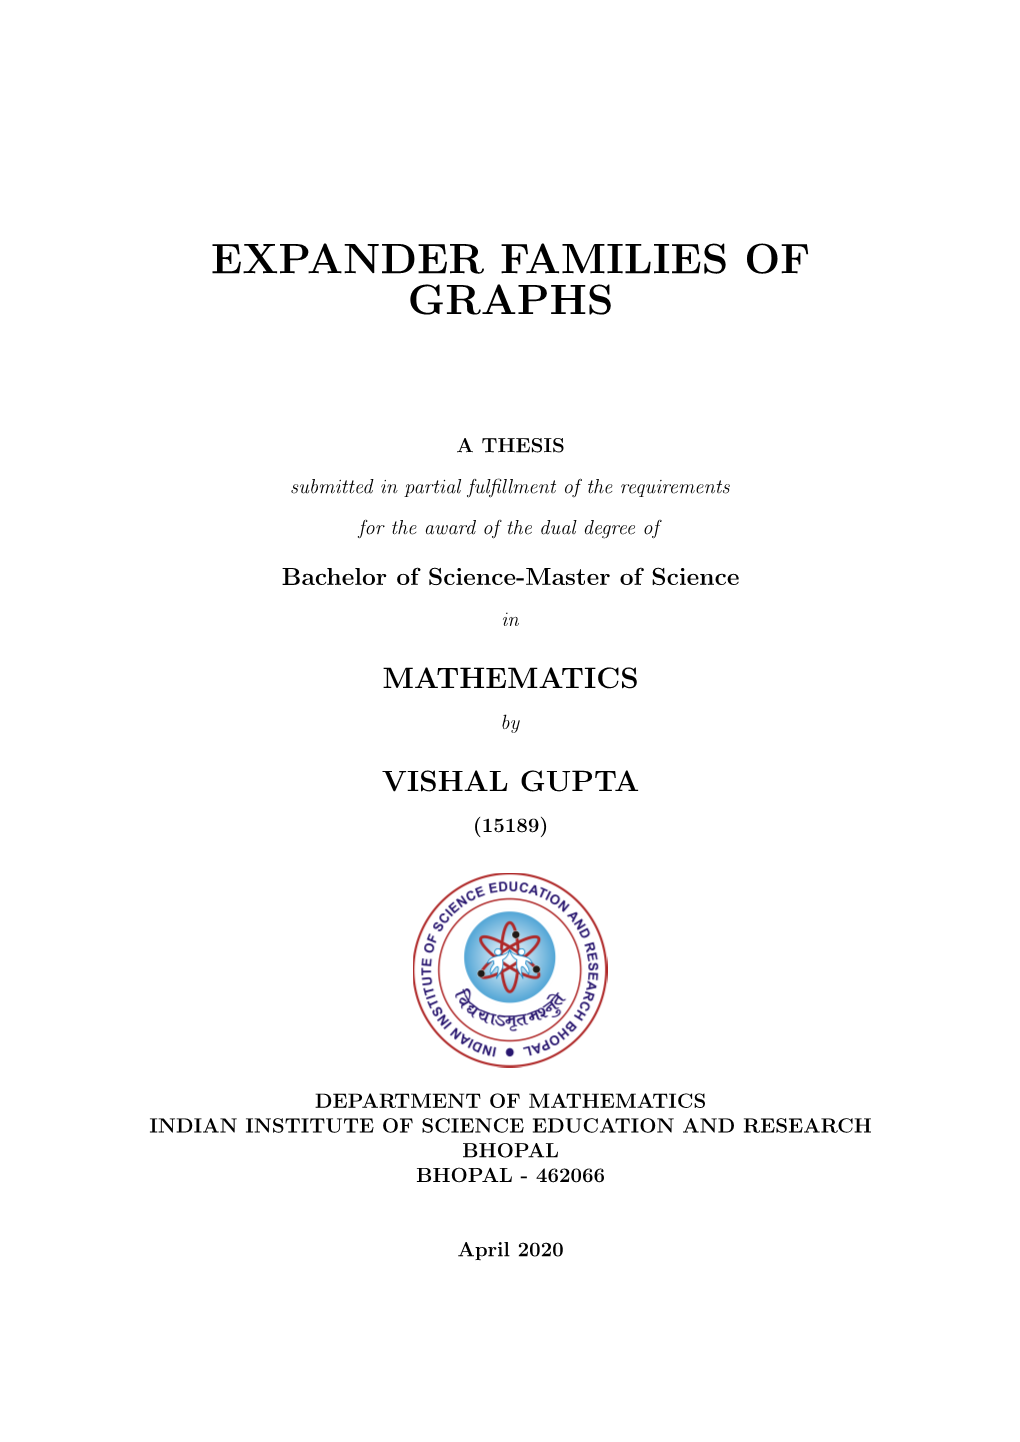 Expander Families of Graphs